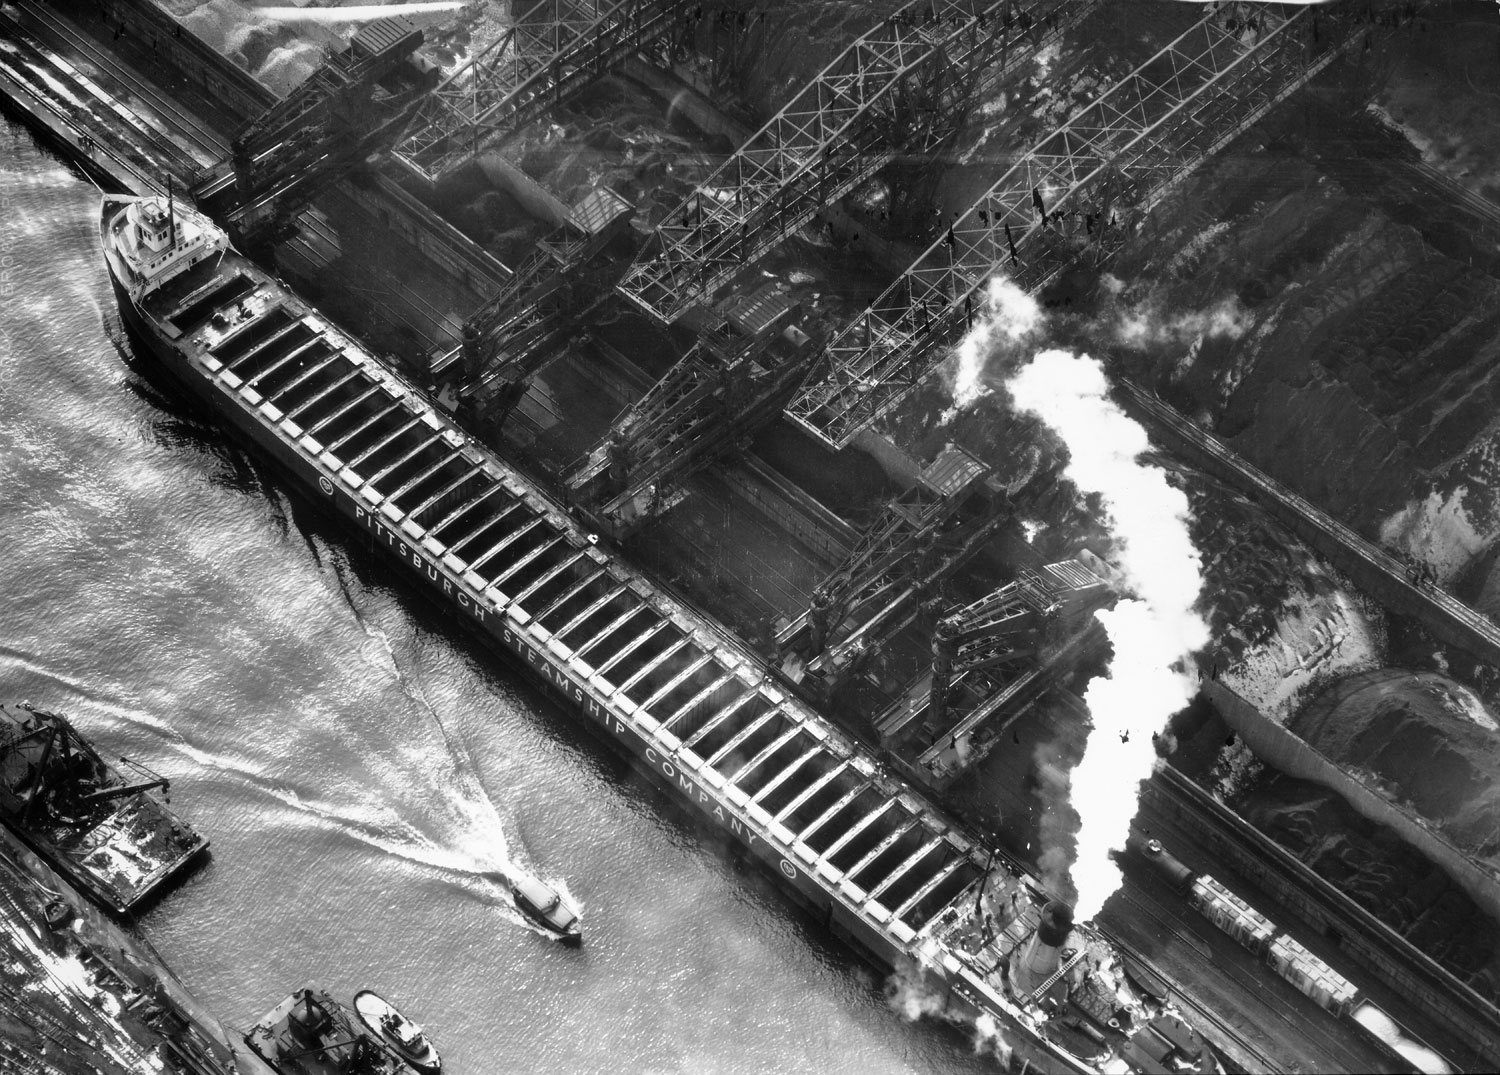 Aerial view of Pittsburgh Steamship Co. ship carrying ore to US Steel plant. Gary, Indiana, photographed from a helicopter, 1952.